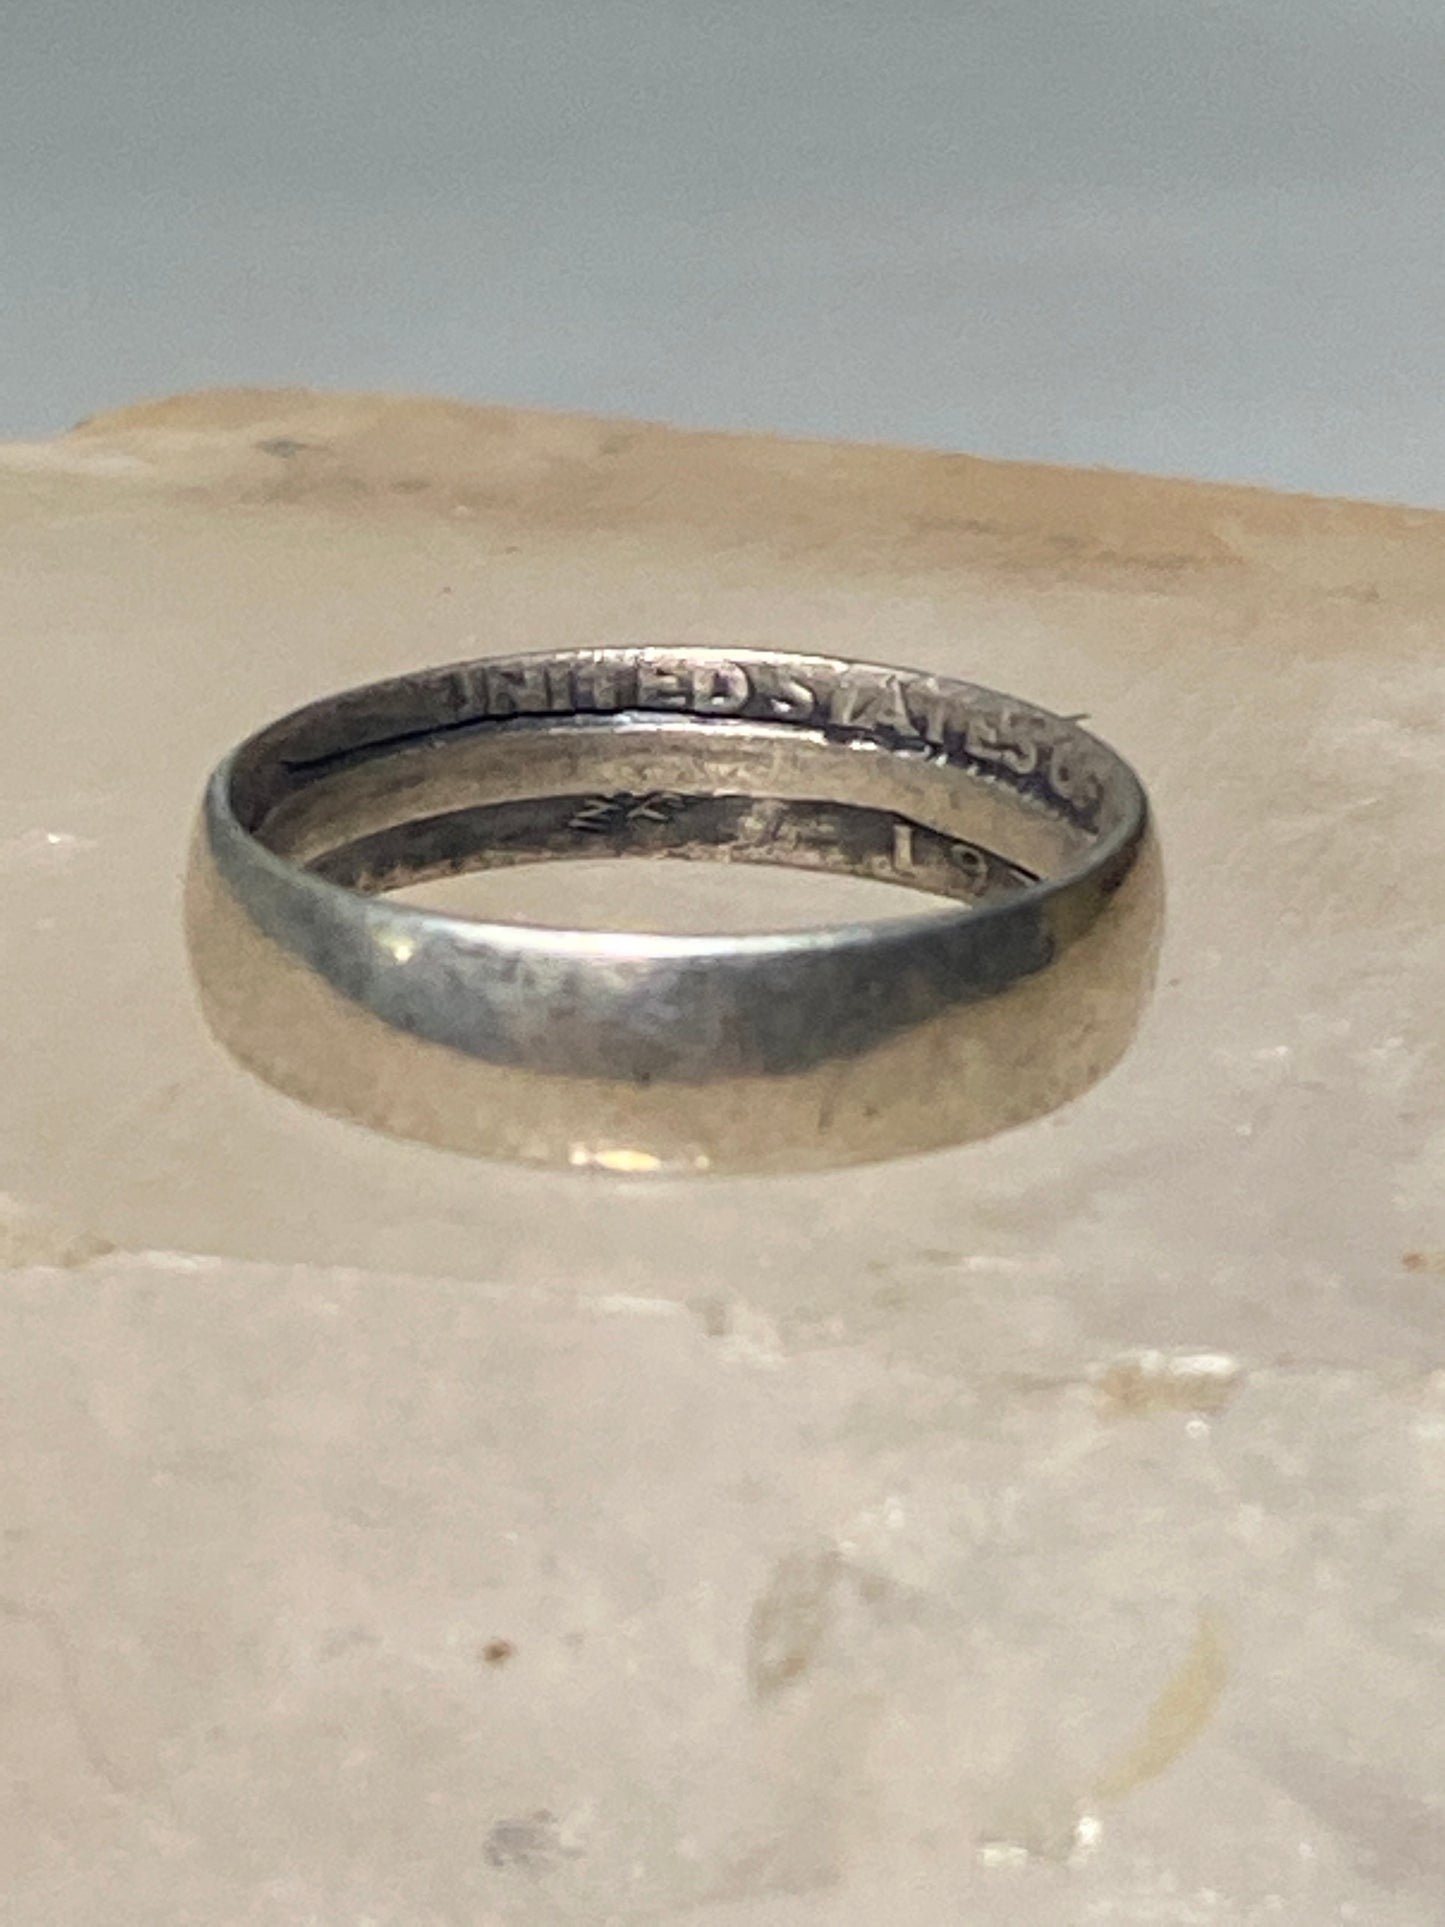 Quarter Dollar ring 1934 trench art band Liberty United States sterling silver women pinky